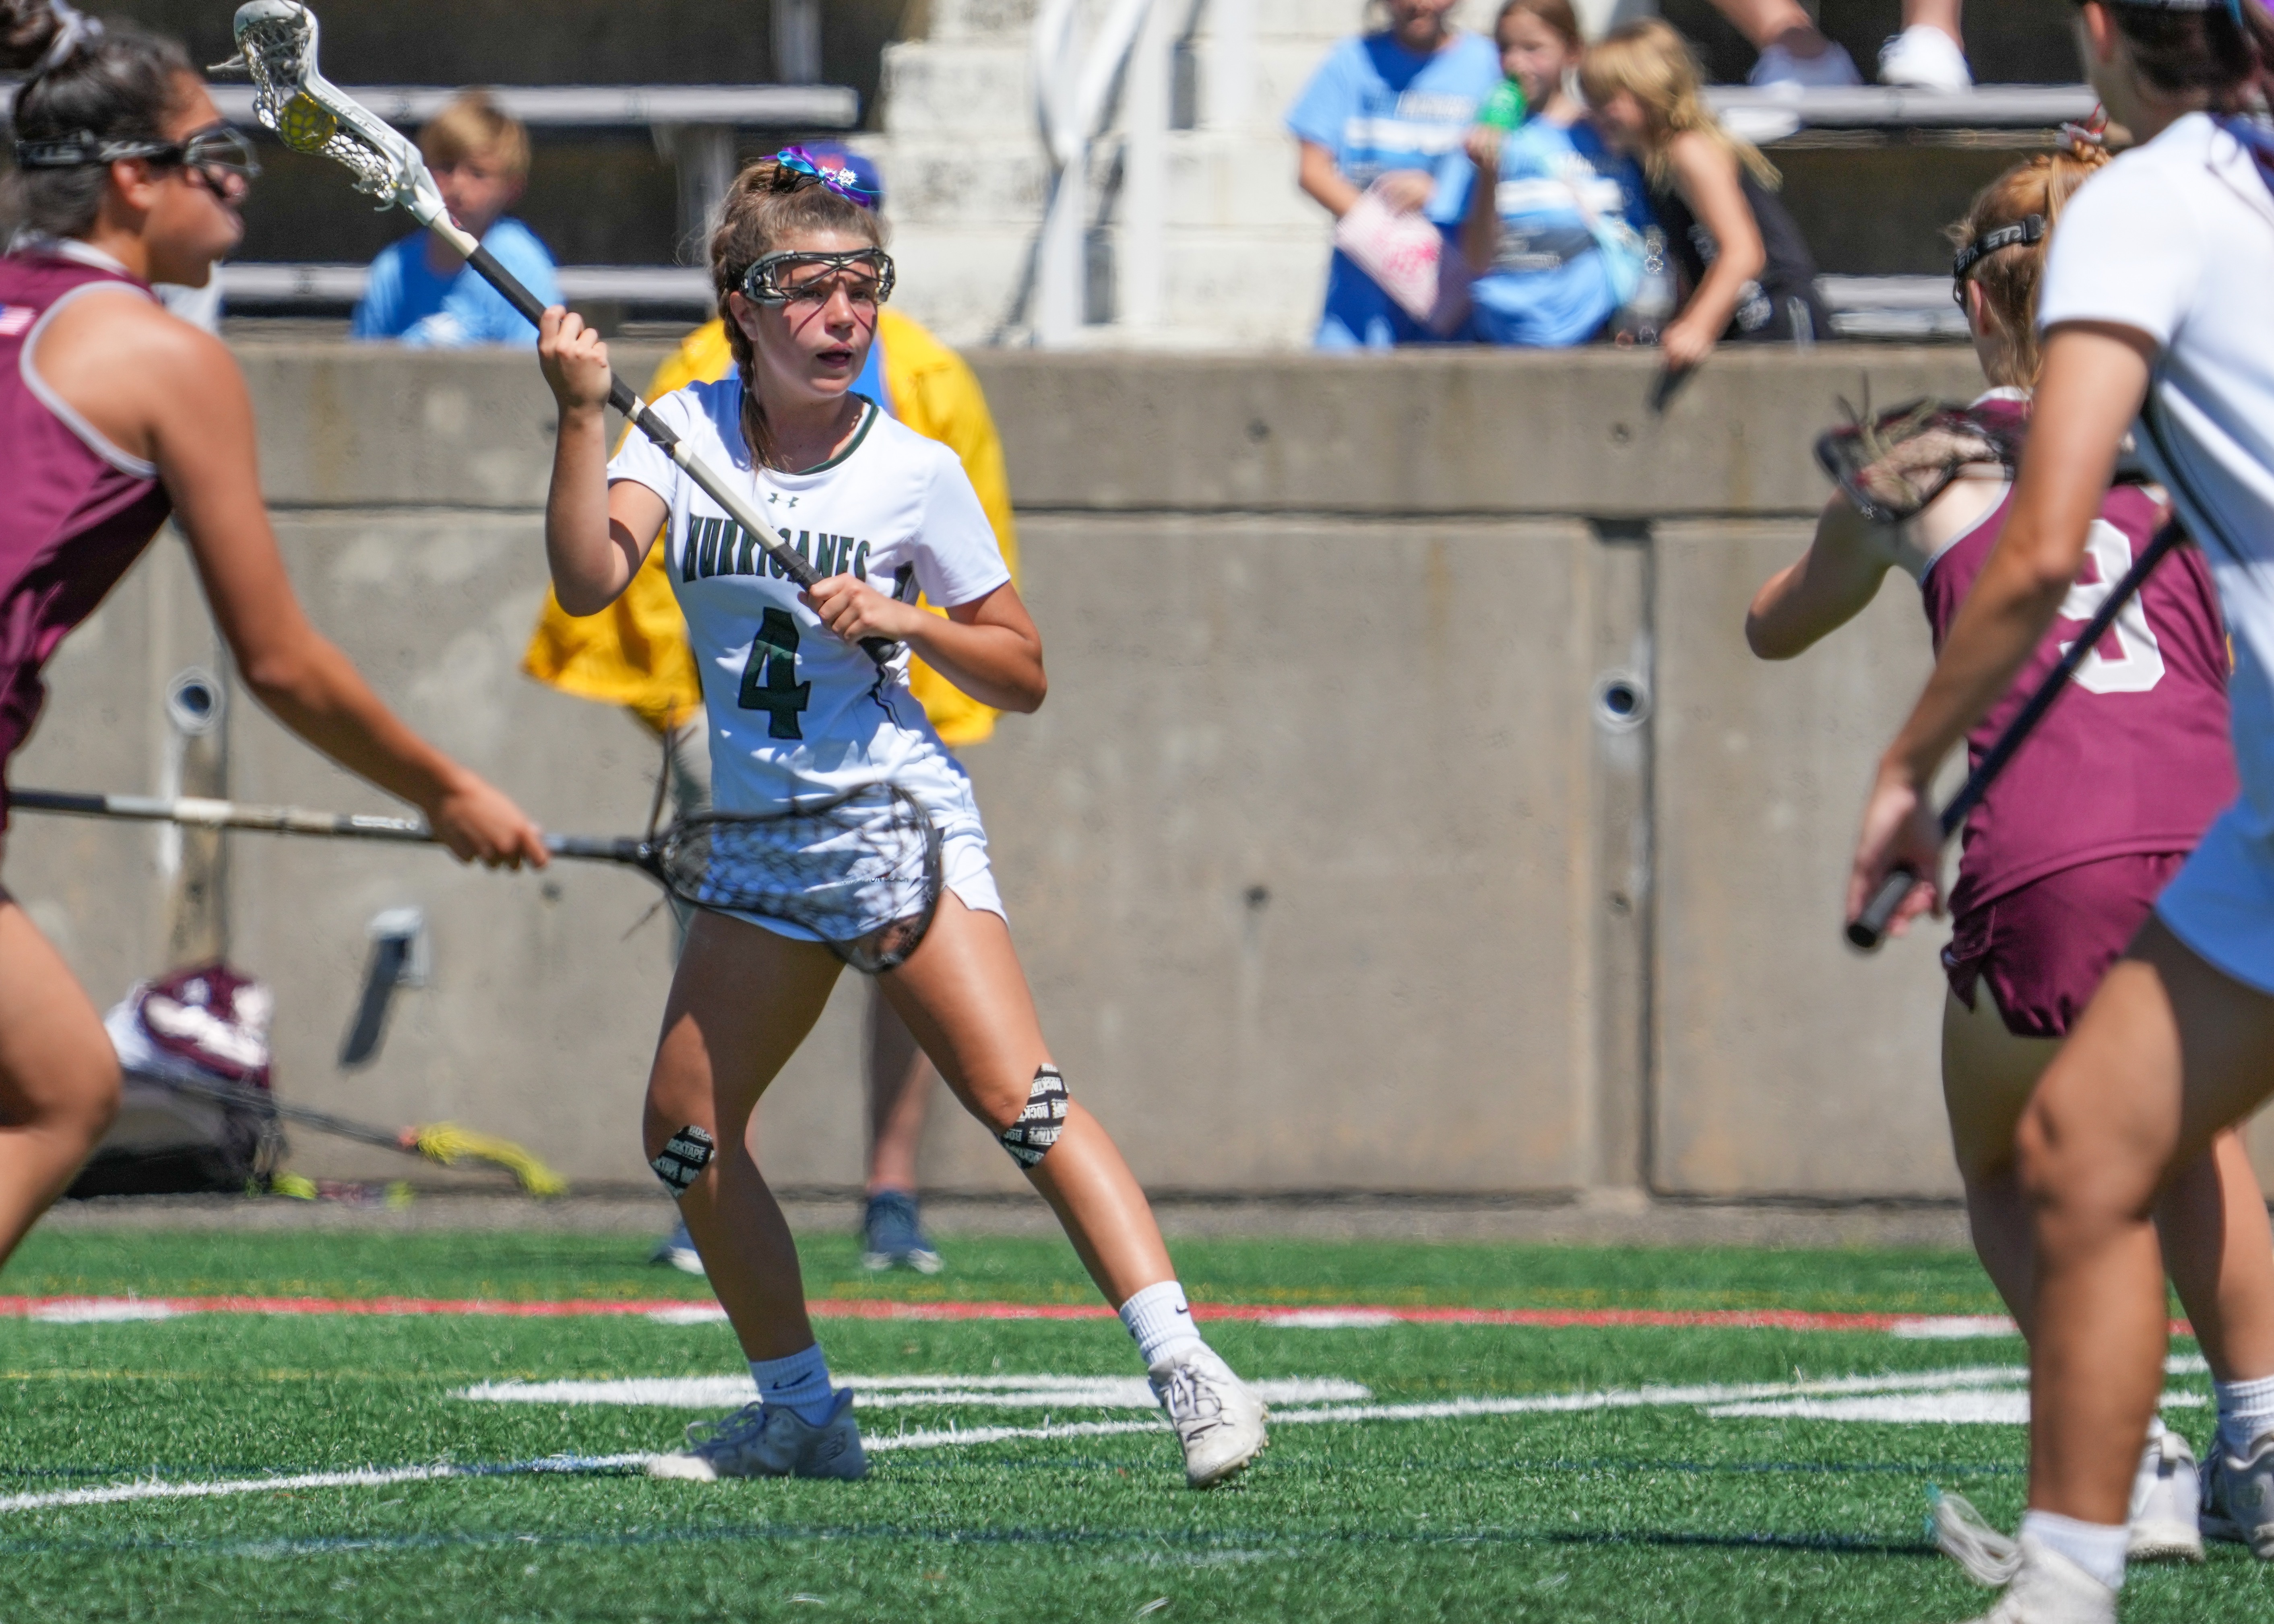 Sophomore attack Brie Provenzano looks to make a play during last year's Class B Long Island championship win. RON ESPOSITO